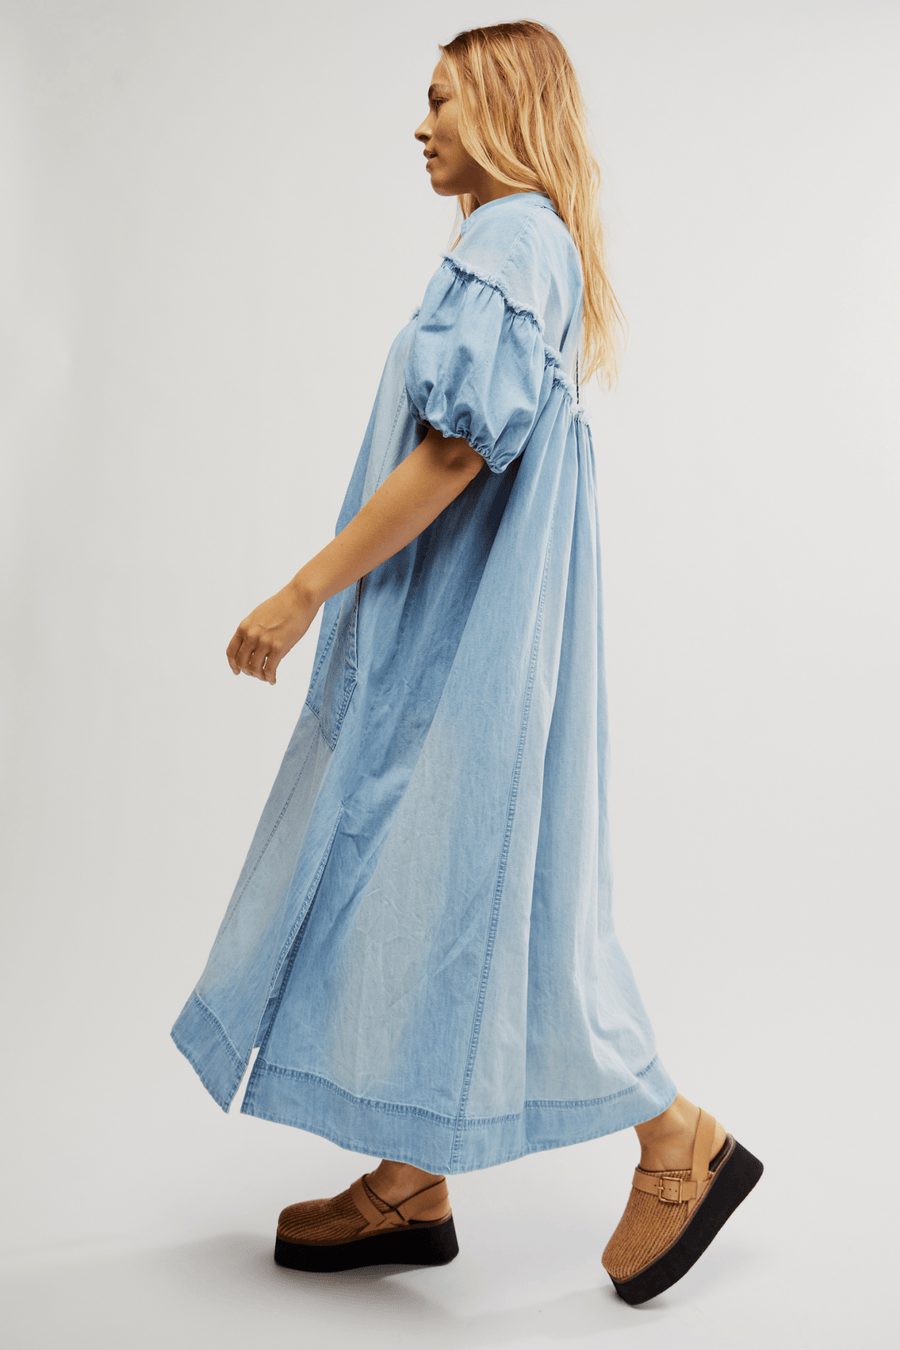 On The Road Maxi Dress by Free People - Blue Sky Fashions & Lingerie